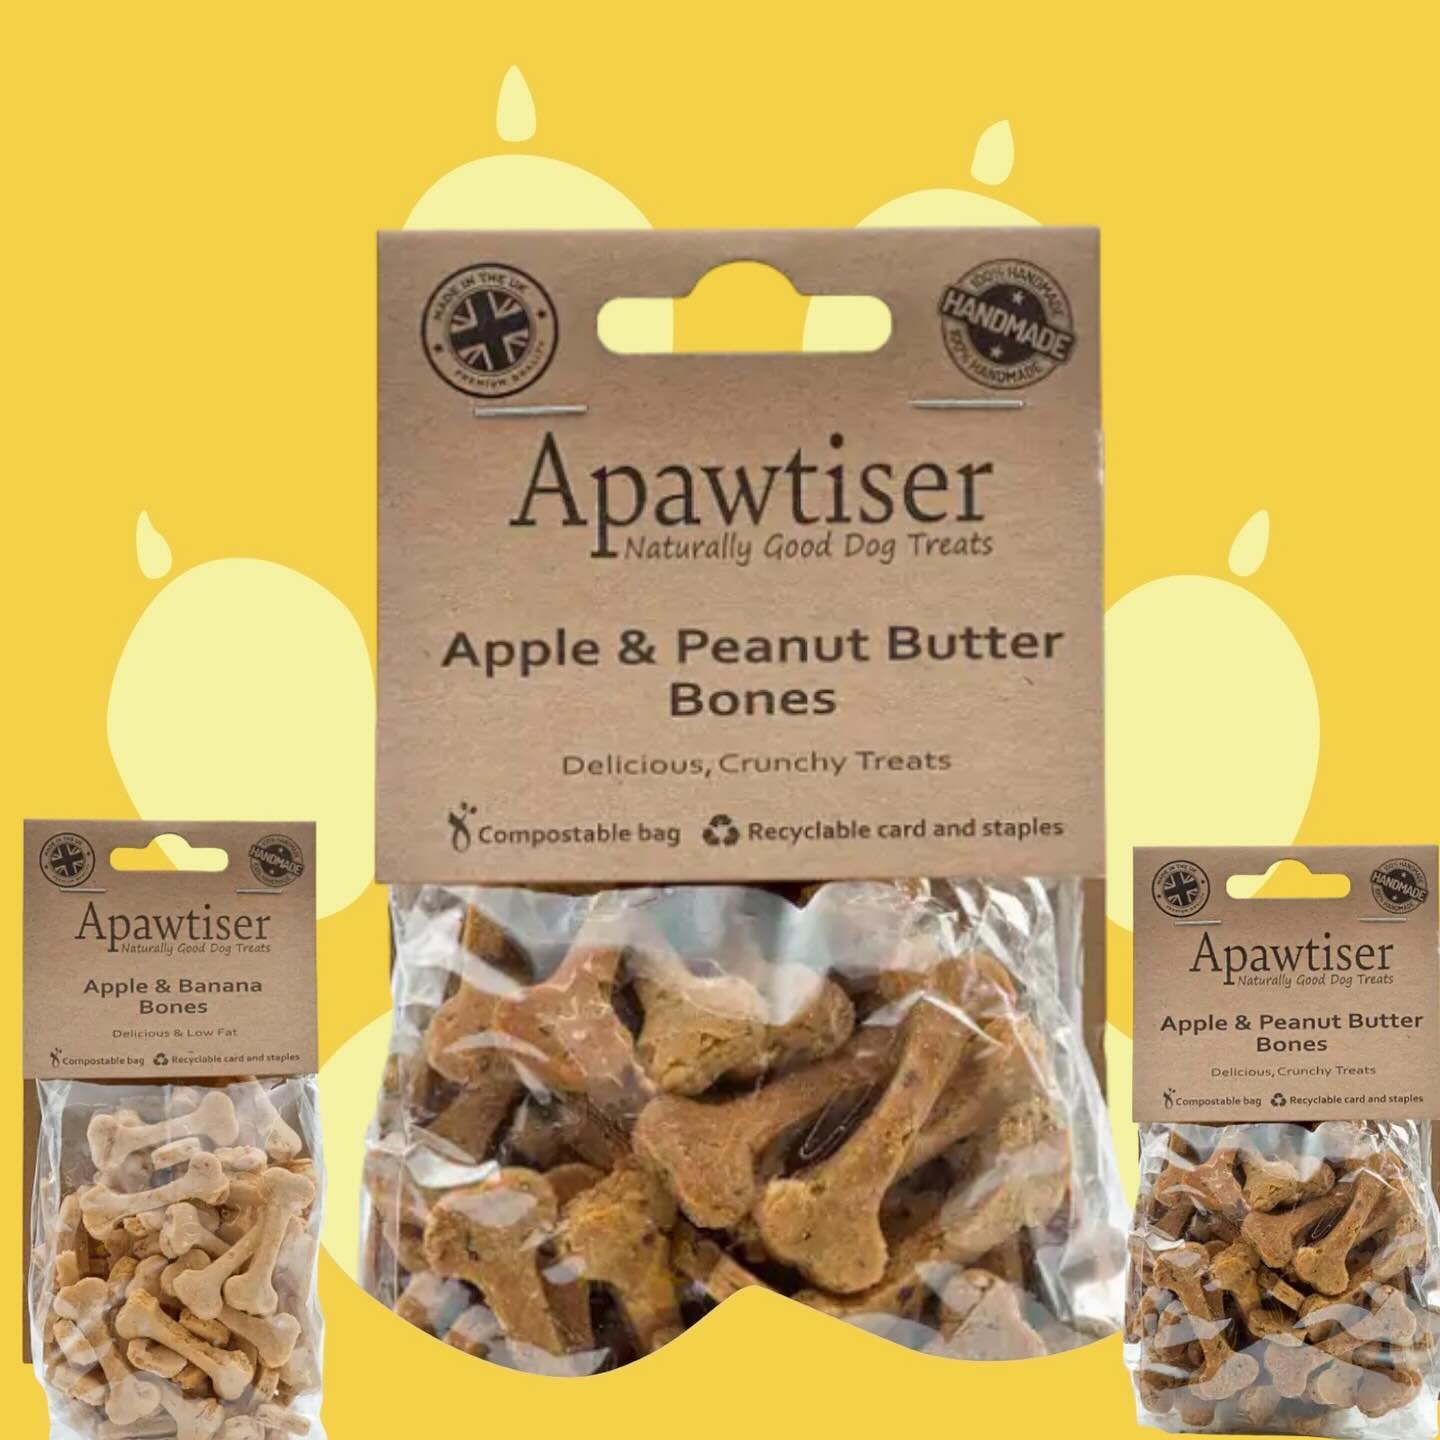 Peanut butter delights for your dog - currently available 🧡 #peanutbutter #dogtreats